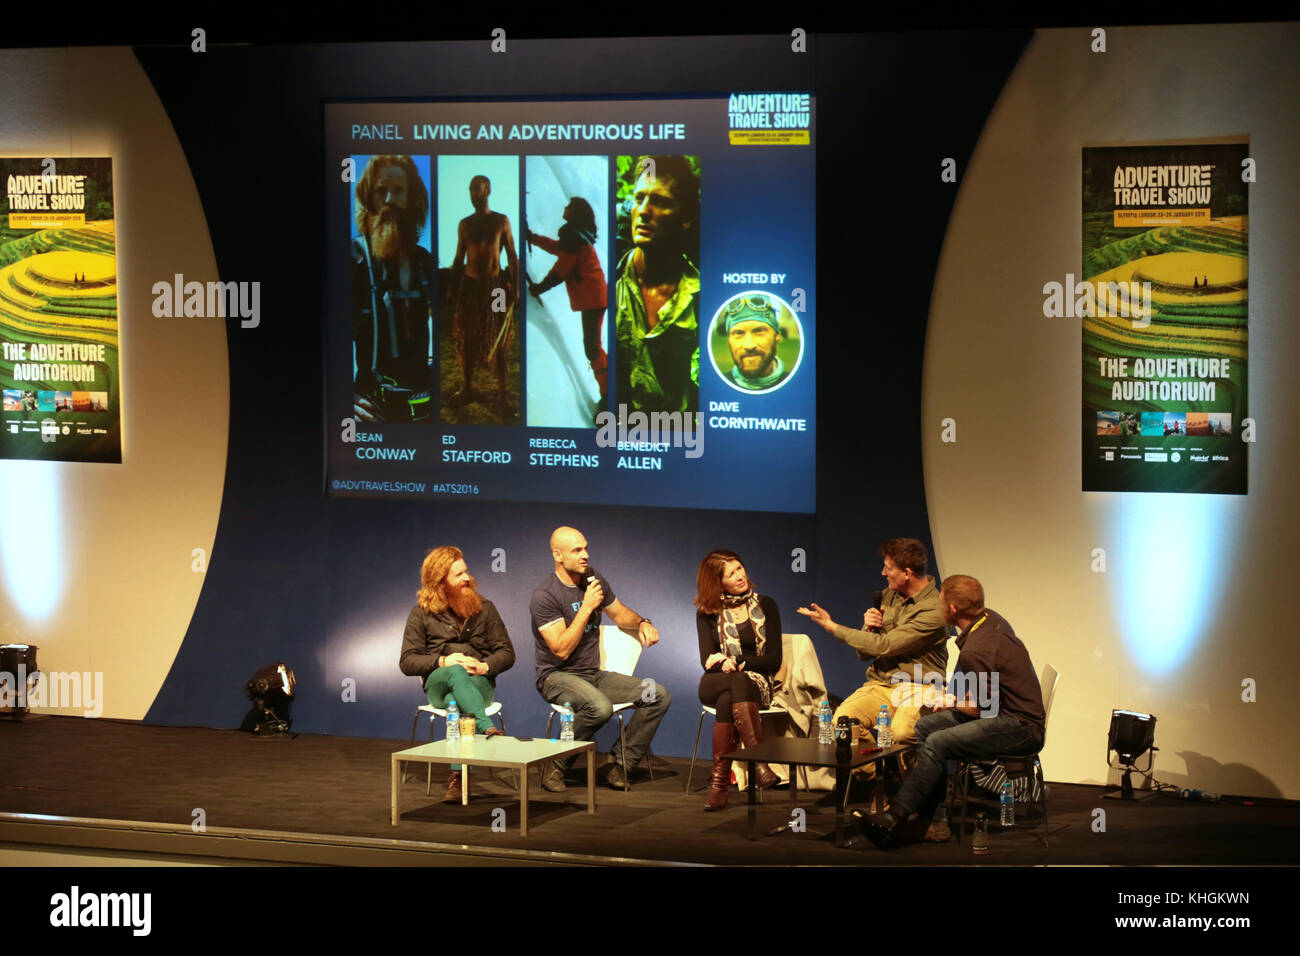 London, UK. 16th Nov, 2017. British Explorer Benedict Allen, seen here in the stage of the Travel and Adventure Show, where he shared some of his experiences including the time he eat a dog in the jungle in order to survive, has been found well and alive in Papua New Guinea, after three weeks gone missing@Paul Quezada -Neiman/Alamy Live News Stock Photo